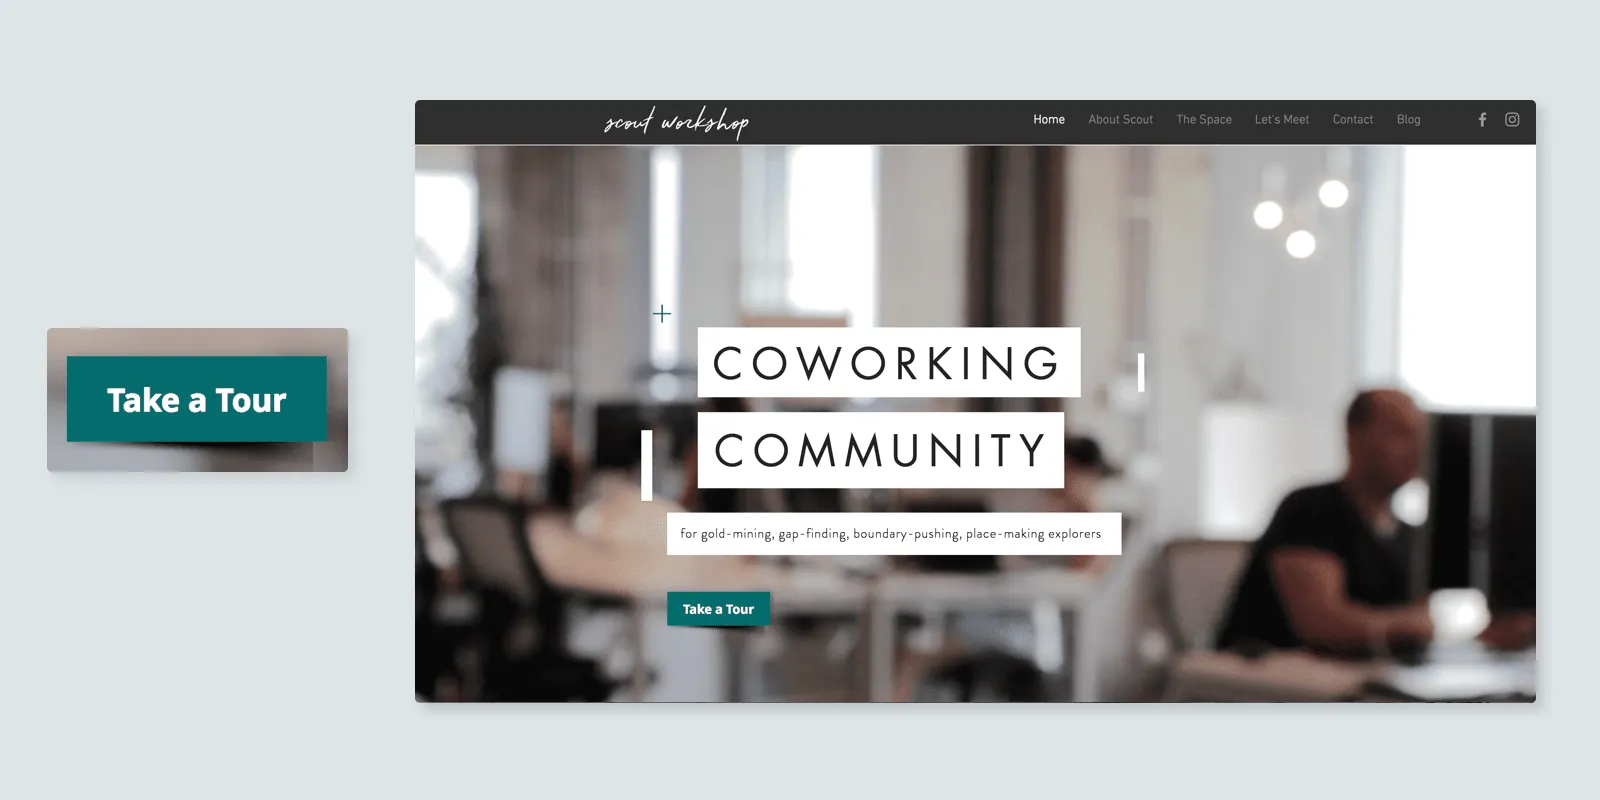 How to create high converting CTAs for your coworking website